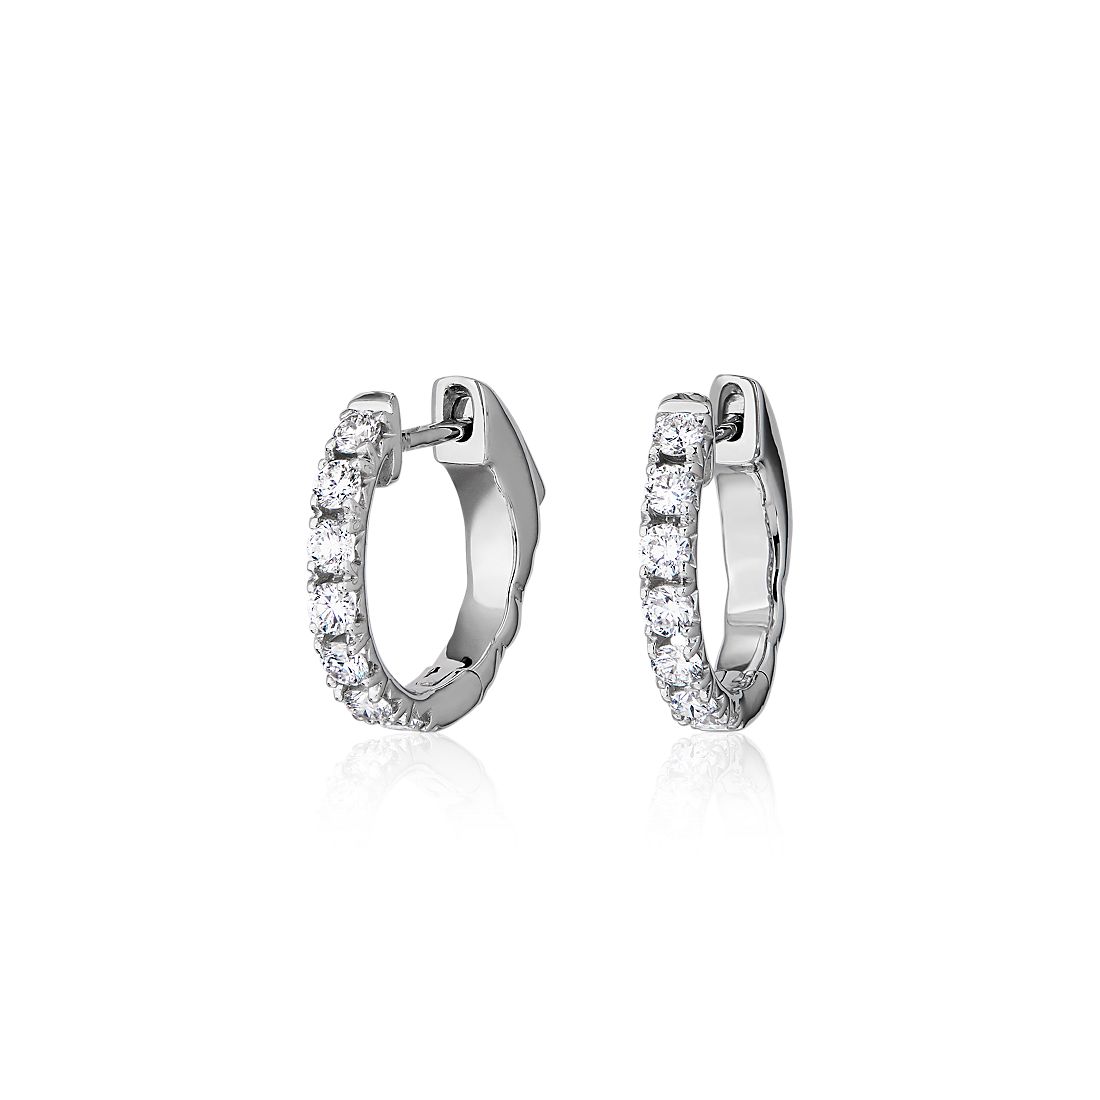 French Pavé Round Hoop Earrings in 14k White Gold (1/2 ct. tw.)